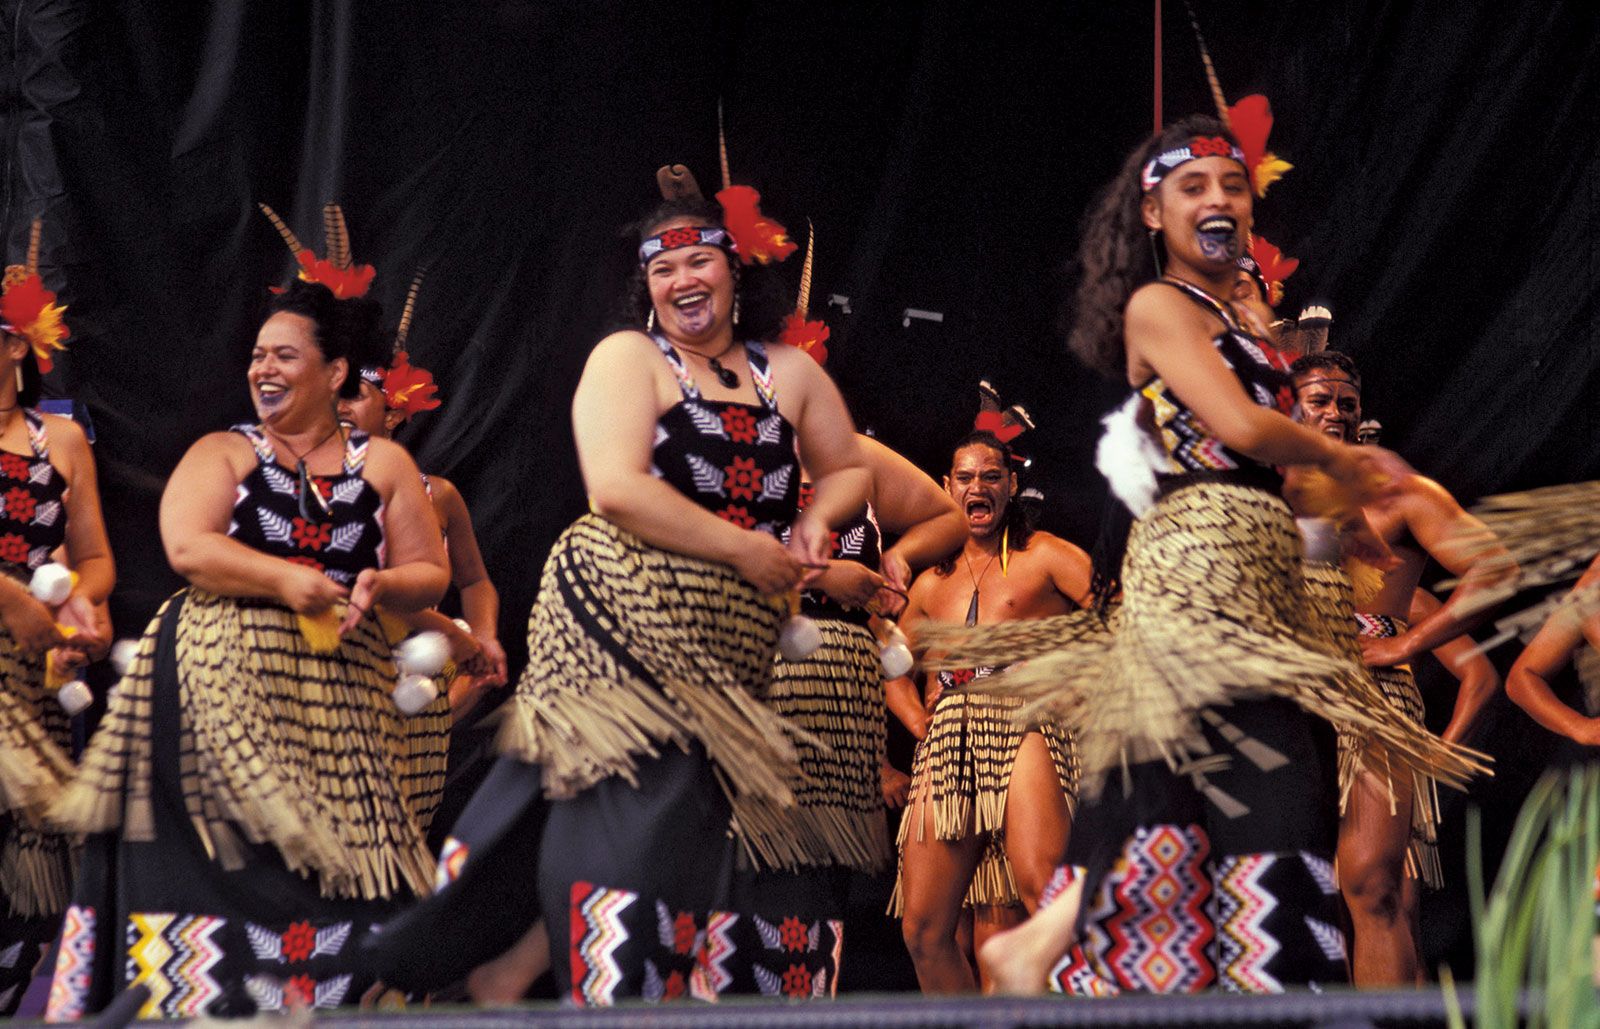 Maori Heritage and Traditions in New Zealand